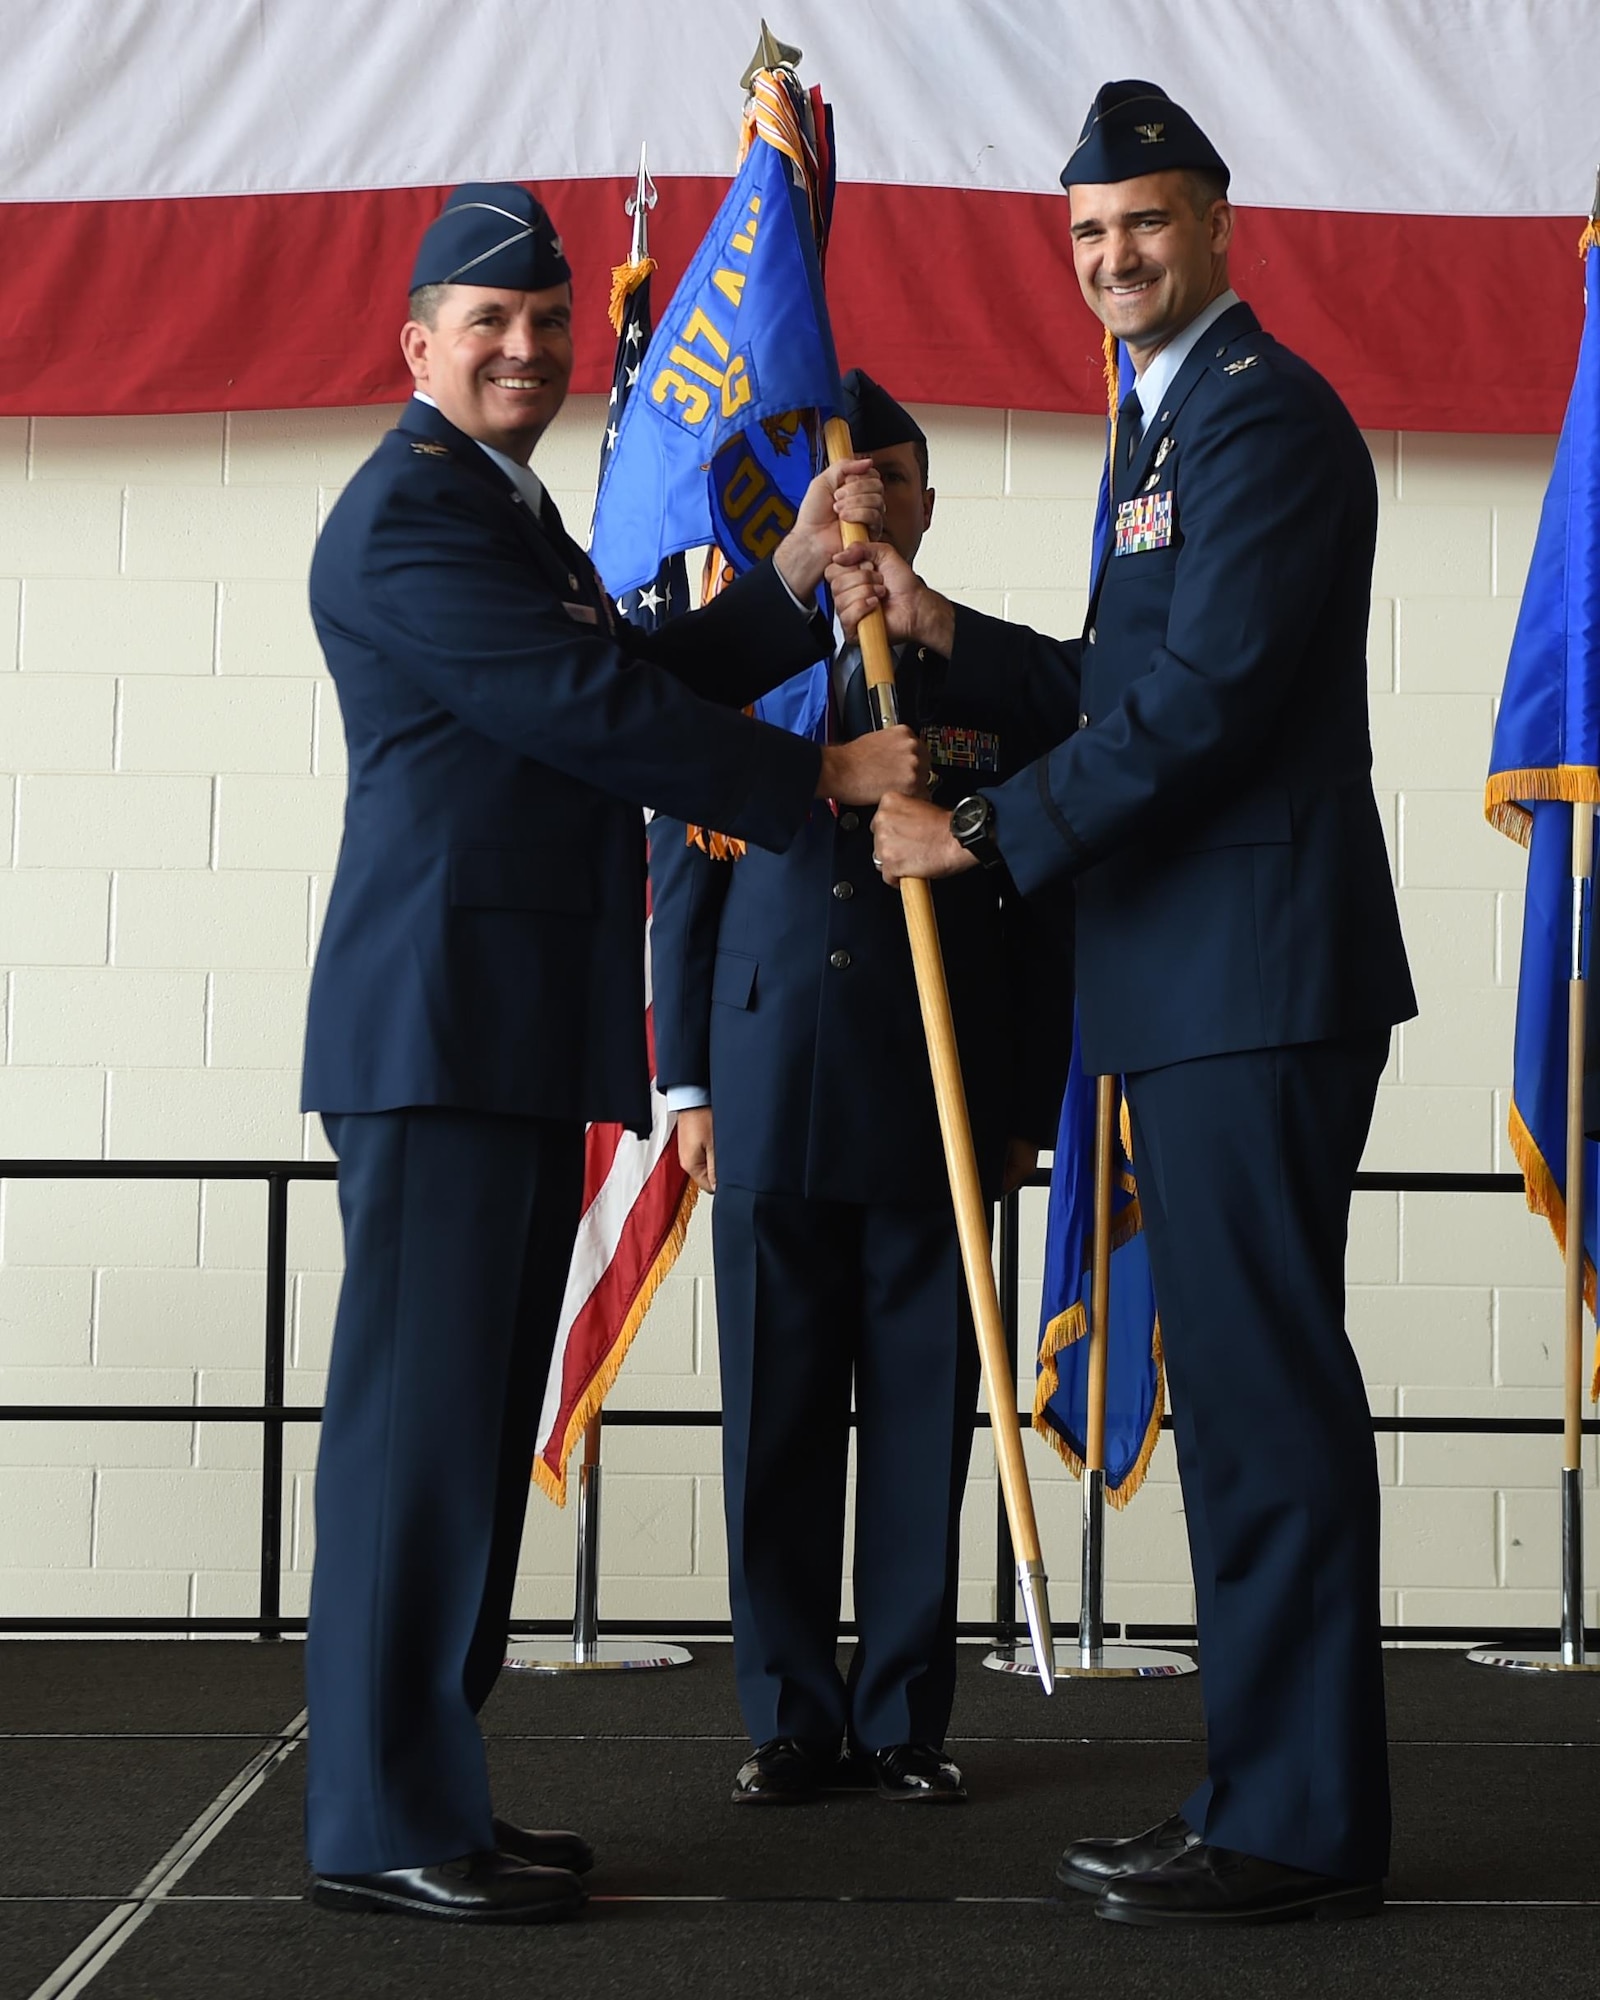 U.S. Air Force Col. David Owens, left, 317th Airlift Wing commander, hands a guidon to Col. James Hackbarth, 317th Operation Support Group commander, at Dyess Air Force Base, Texas July, 6, 2017. The 317th OSG was created in support of the newly activated 317th Airlift Wing. (U.S. Air Force photo by Senior Airman Alexander Guerrero)